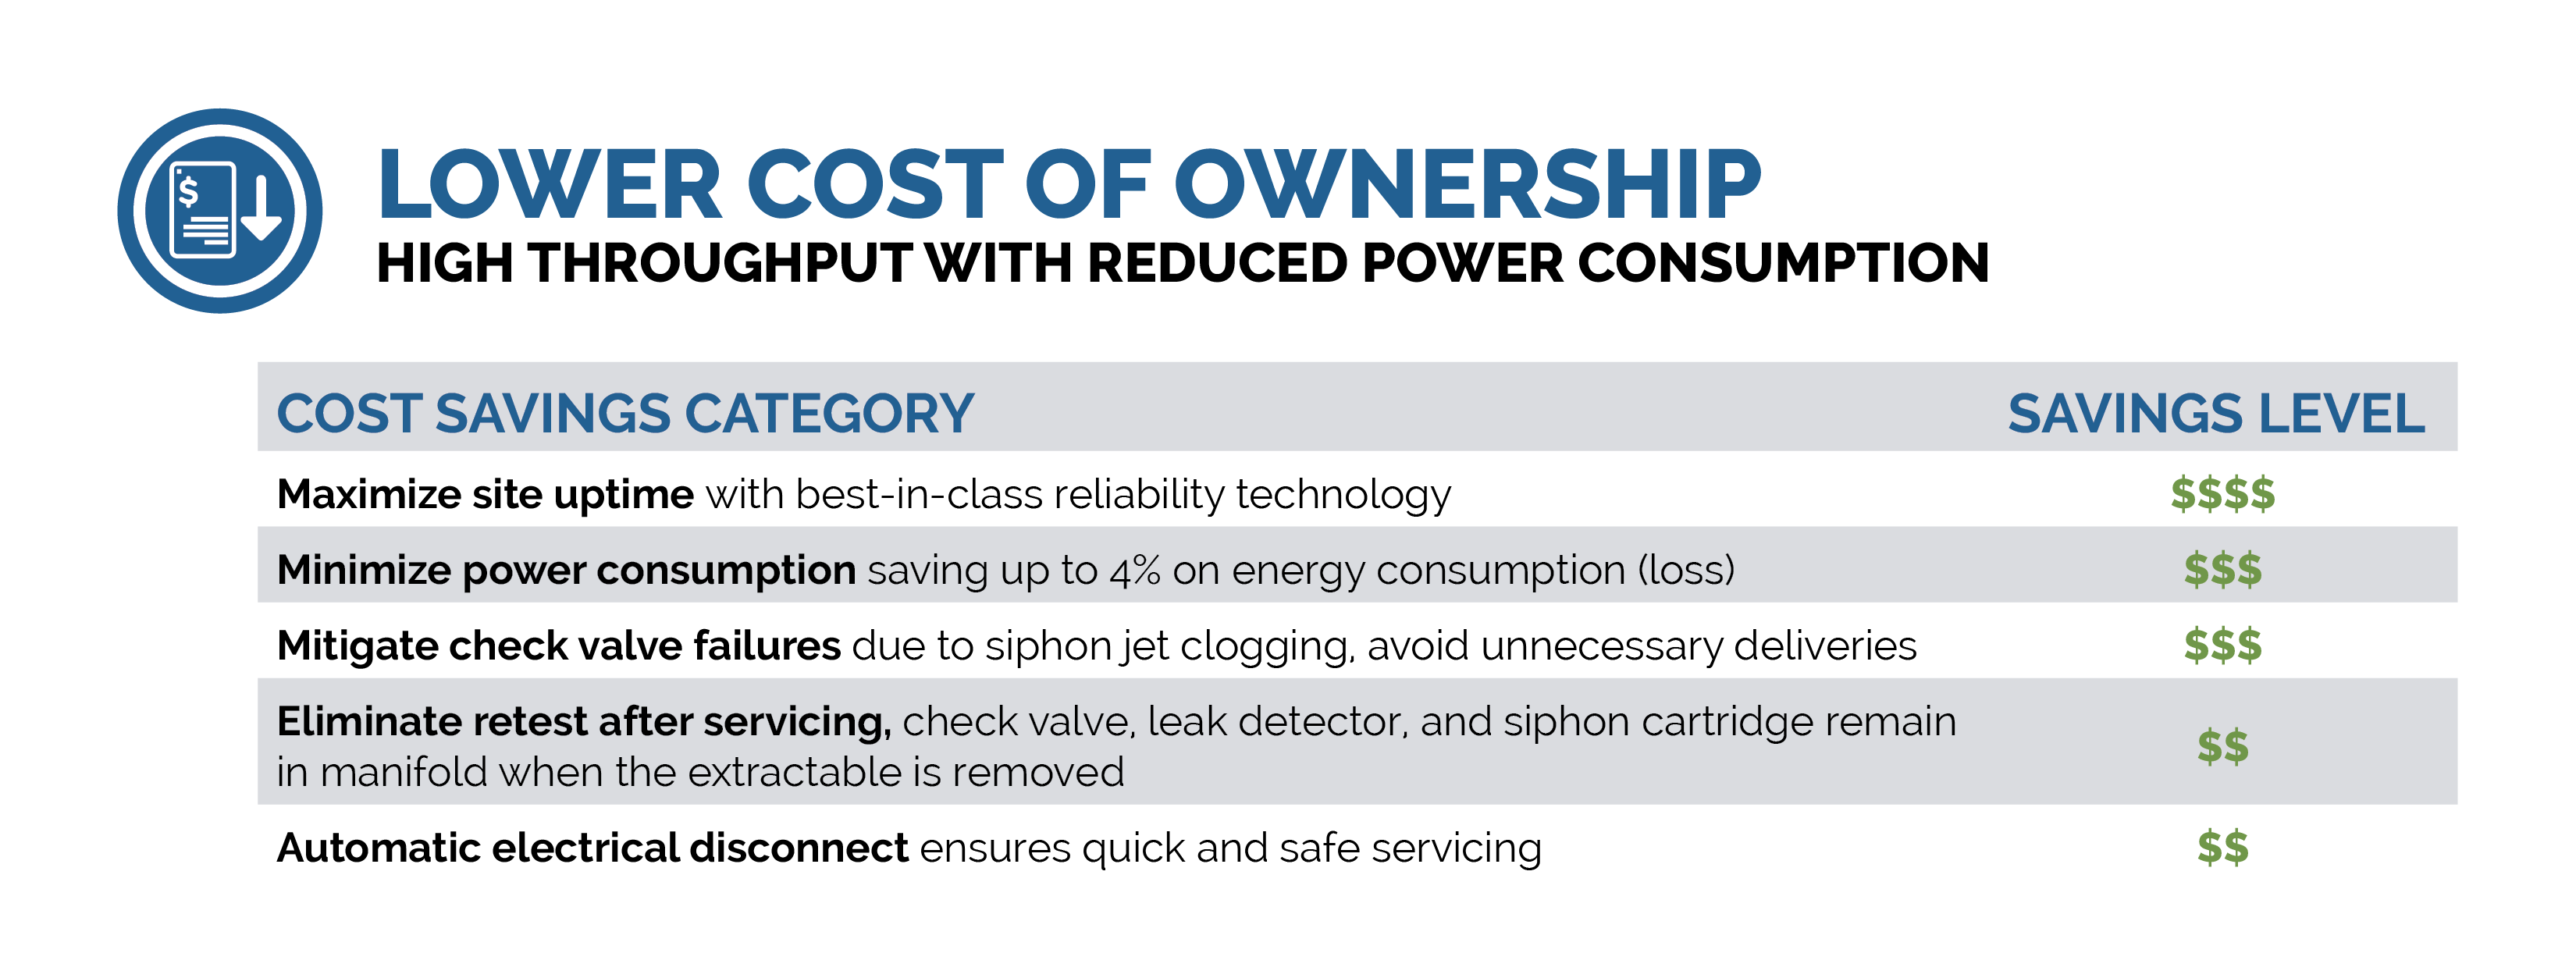 RJ Lower Cost of Ownership